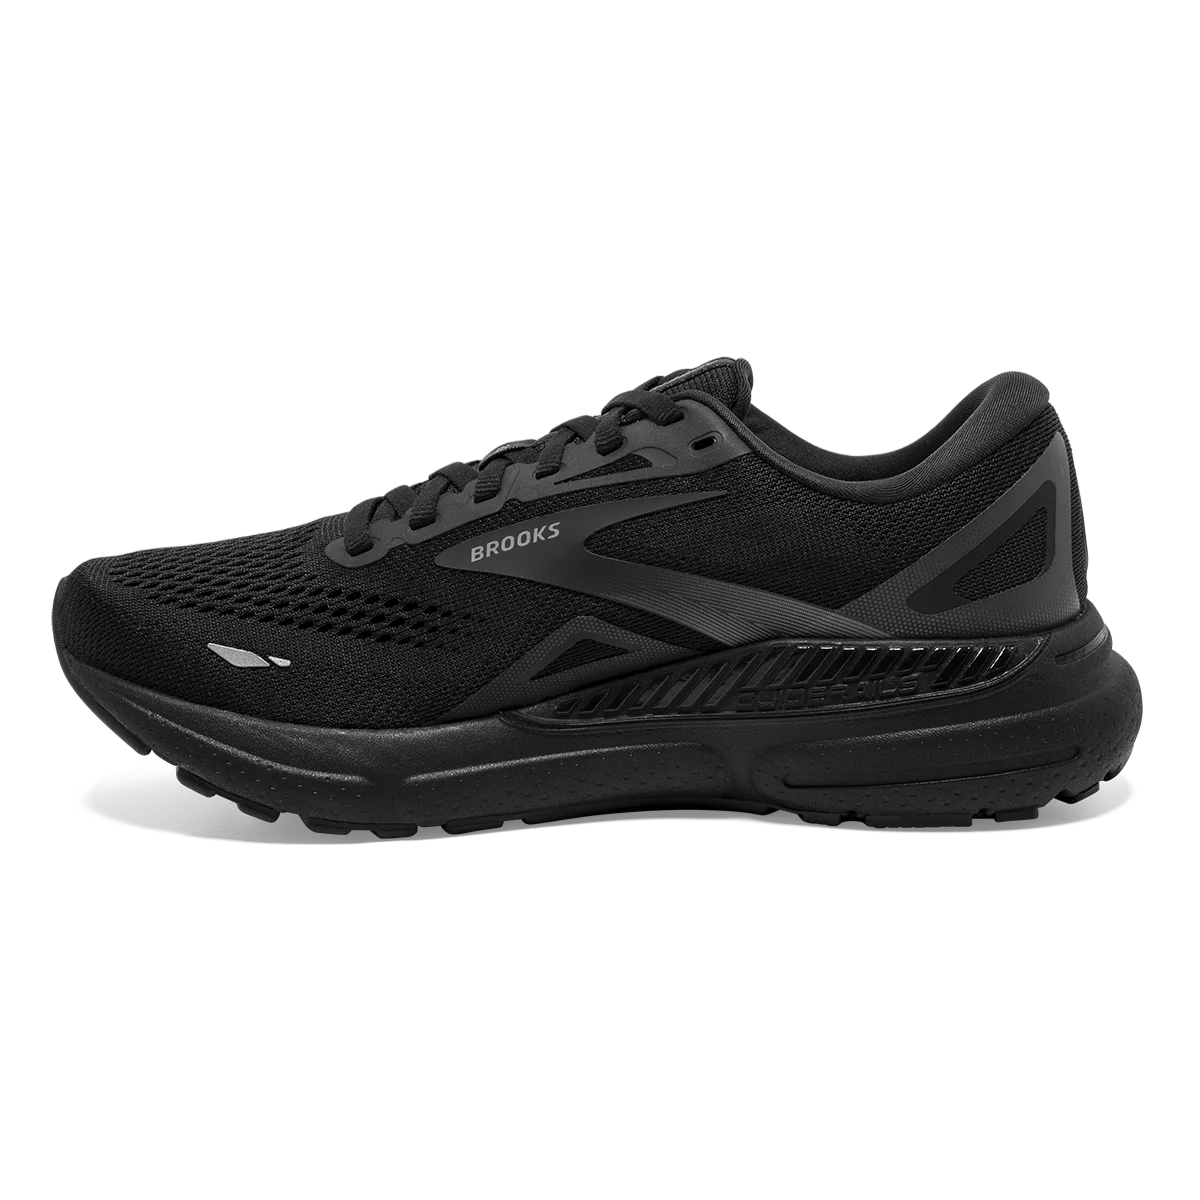 Medial view of the Women's Adrenaline GTS 23 by Brooks in the color Black/Black/Ebony